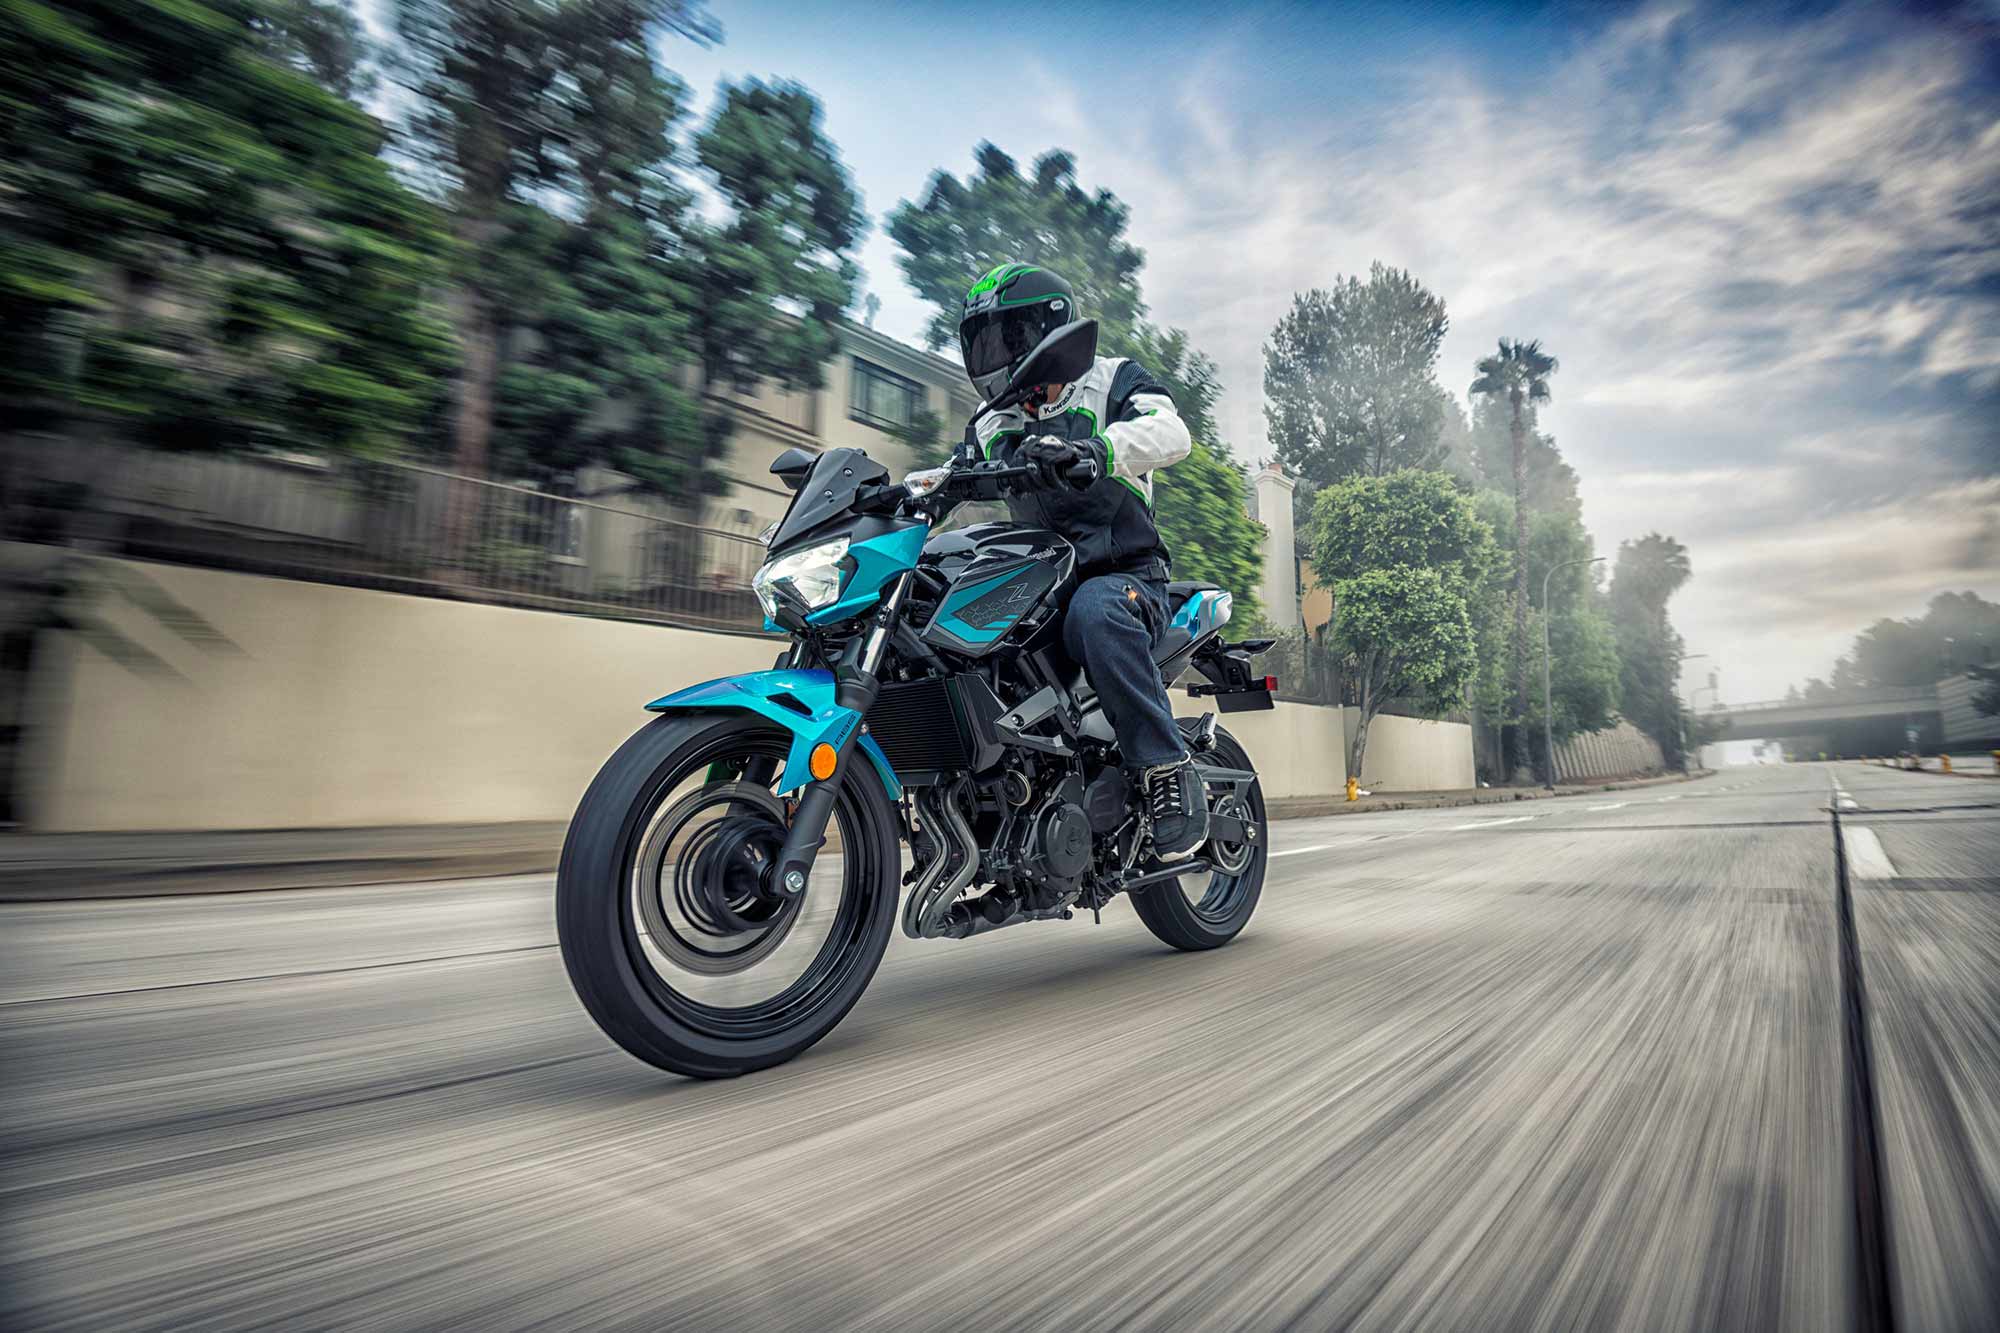 2021 Z400 ABS Buyer's Guide: Specs, Photos, Price | Cycle World